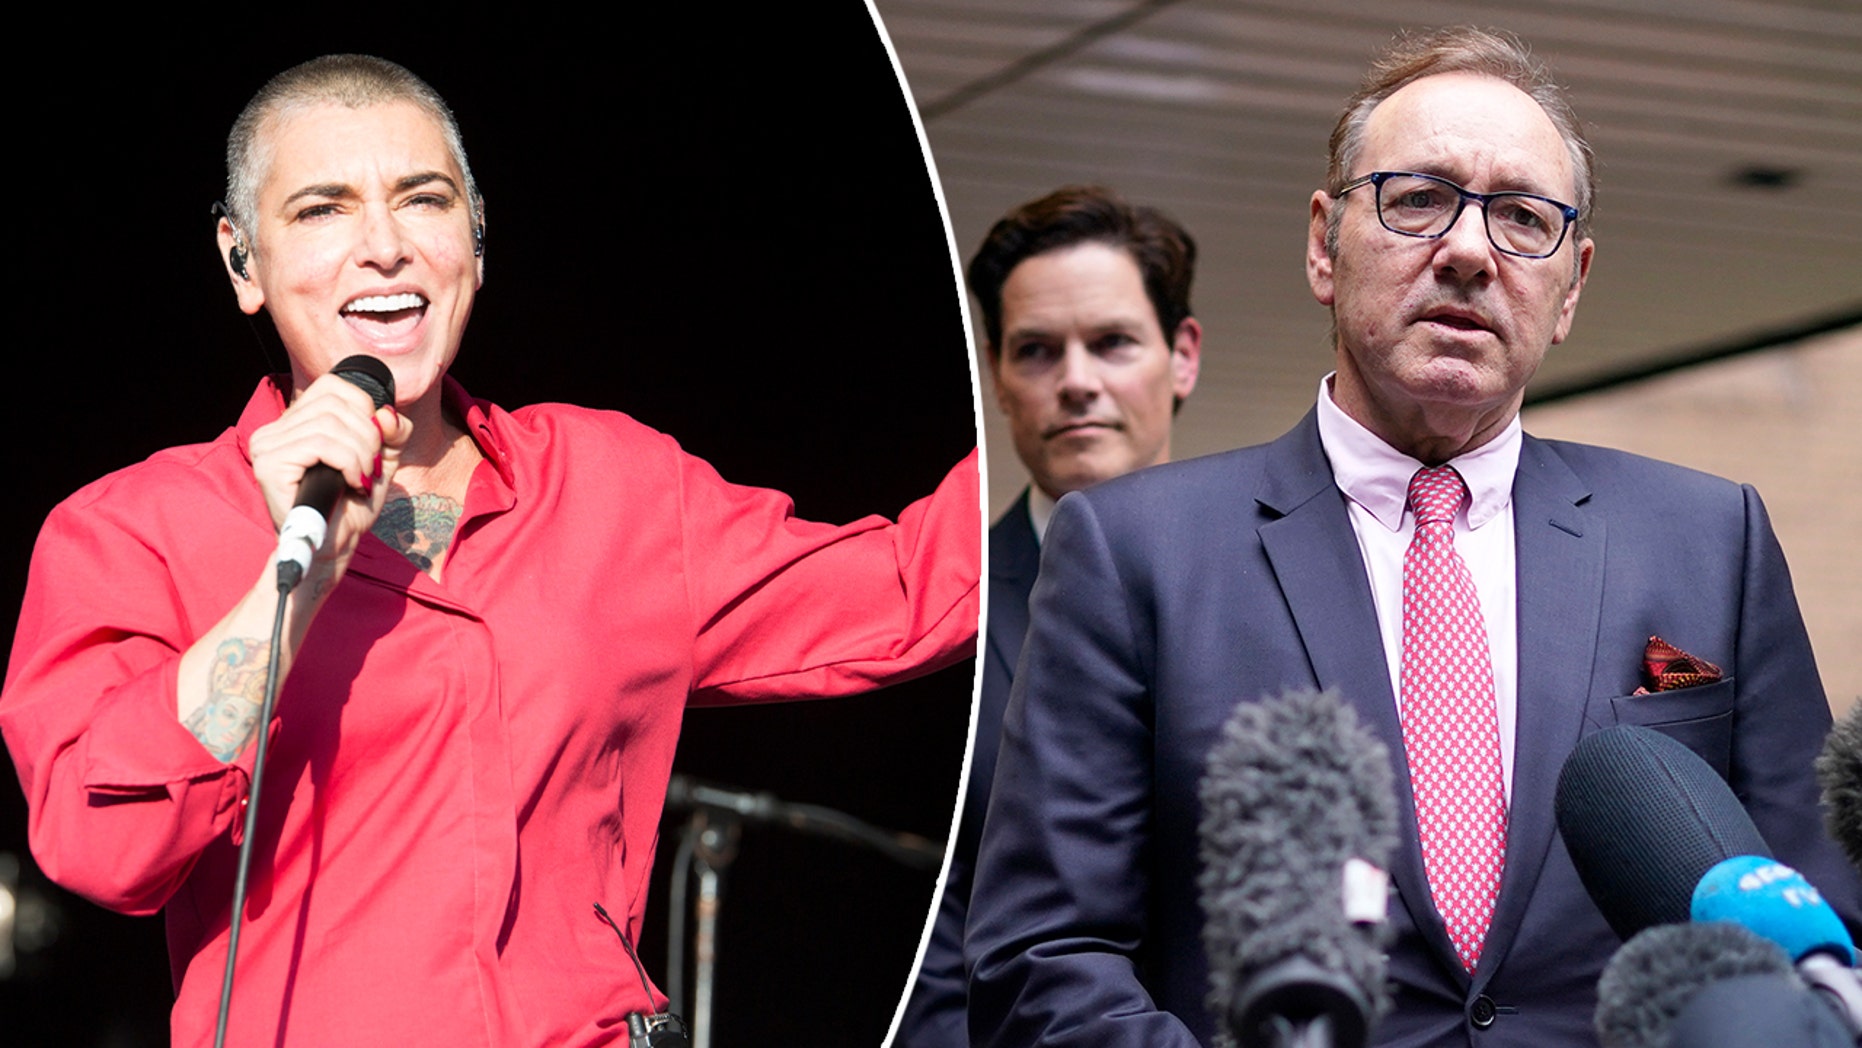 side by side photos of Sinéad O'Connor on stage and Kevin Spacey outside courthouse